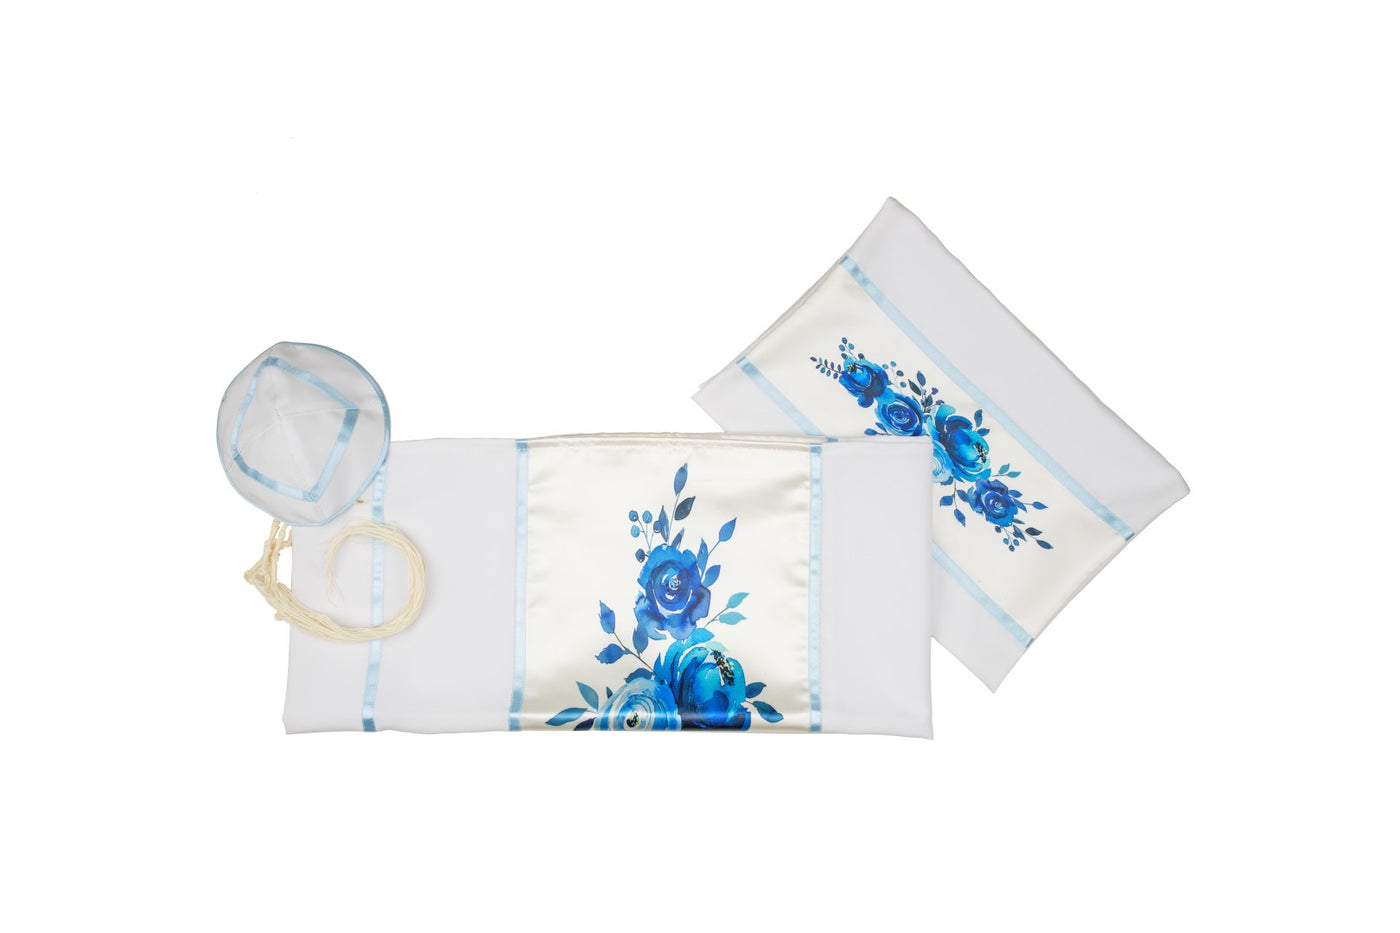 Watercolor Blue Roses Bouquet Tallit for Women, Bat Mitzvah Tallit, Girls Tallit, Womens Tallit from Israel